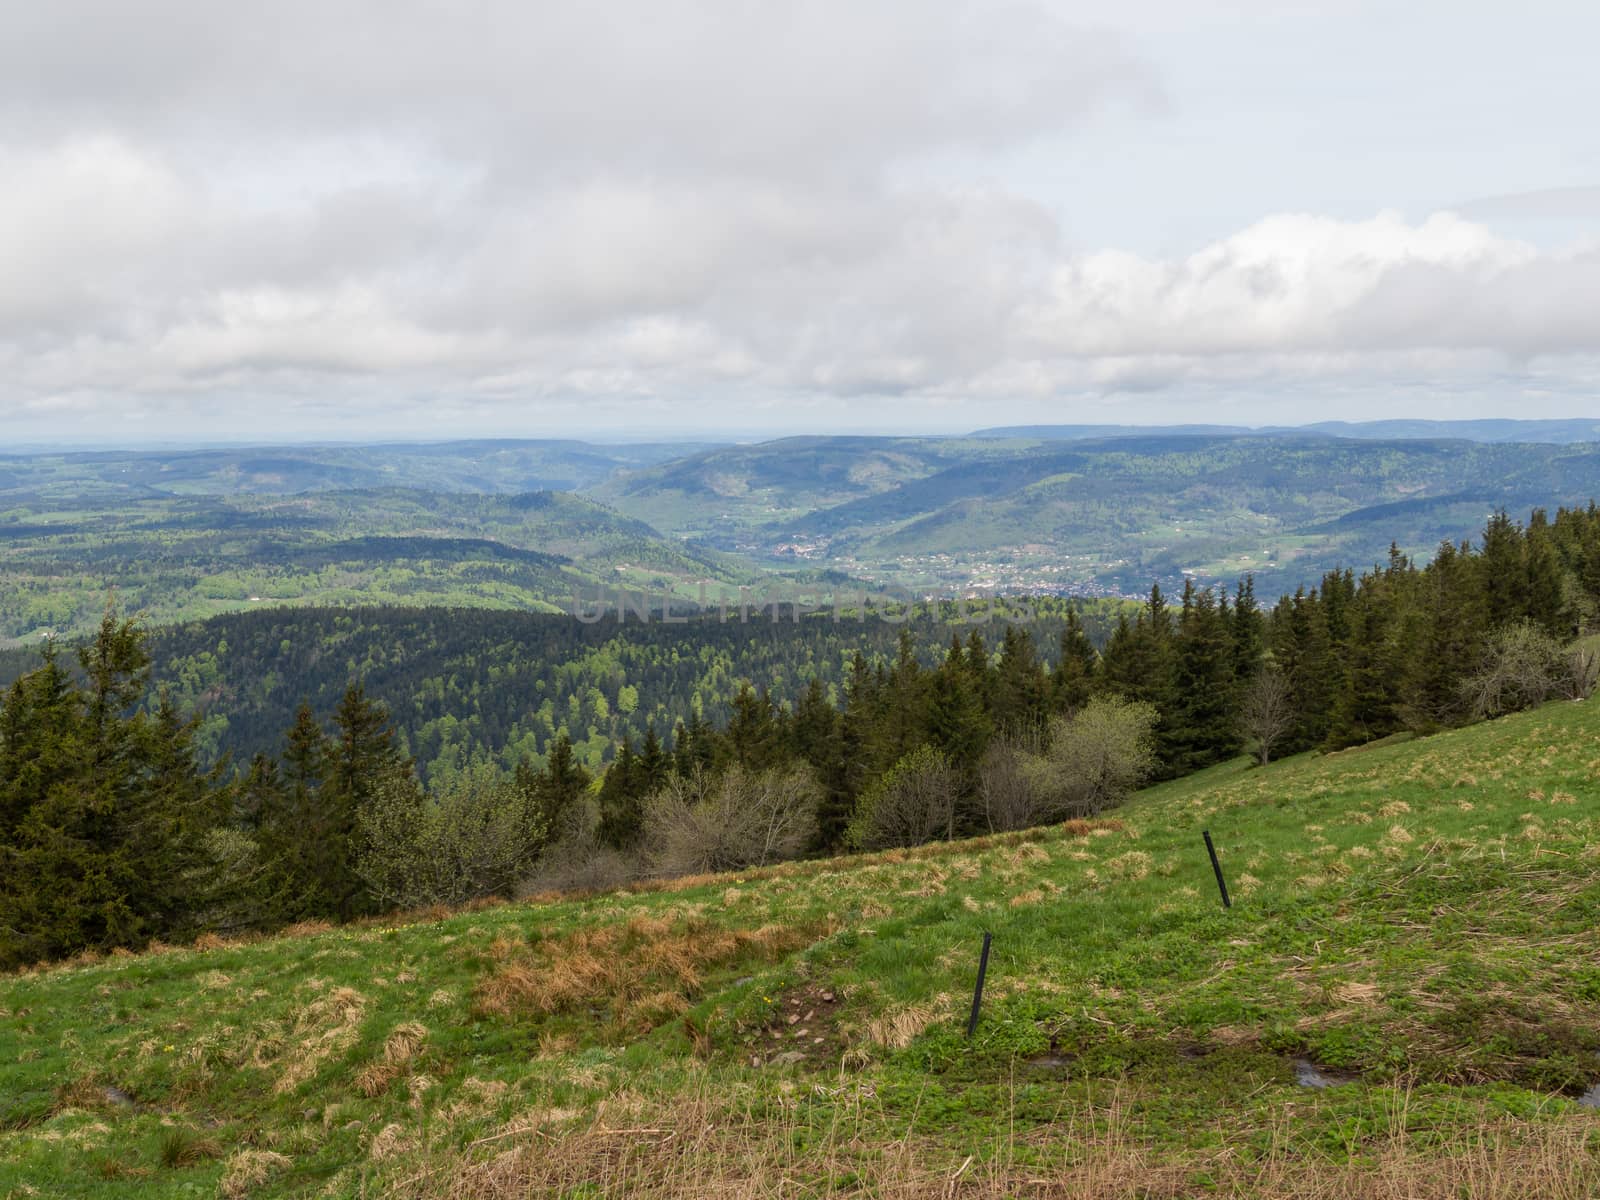 Overlooking the Vosges hills in France past a wet grassland